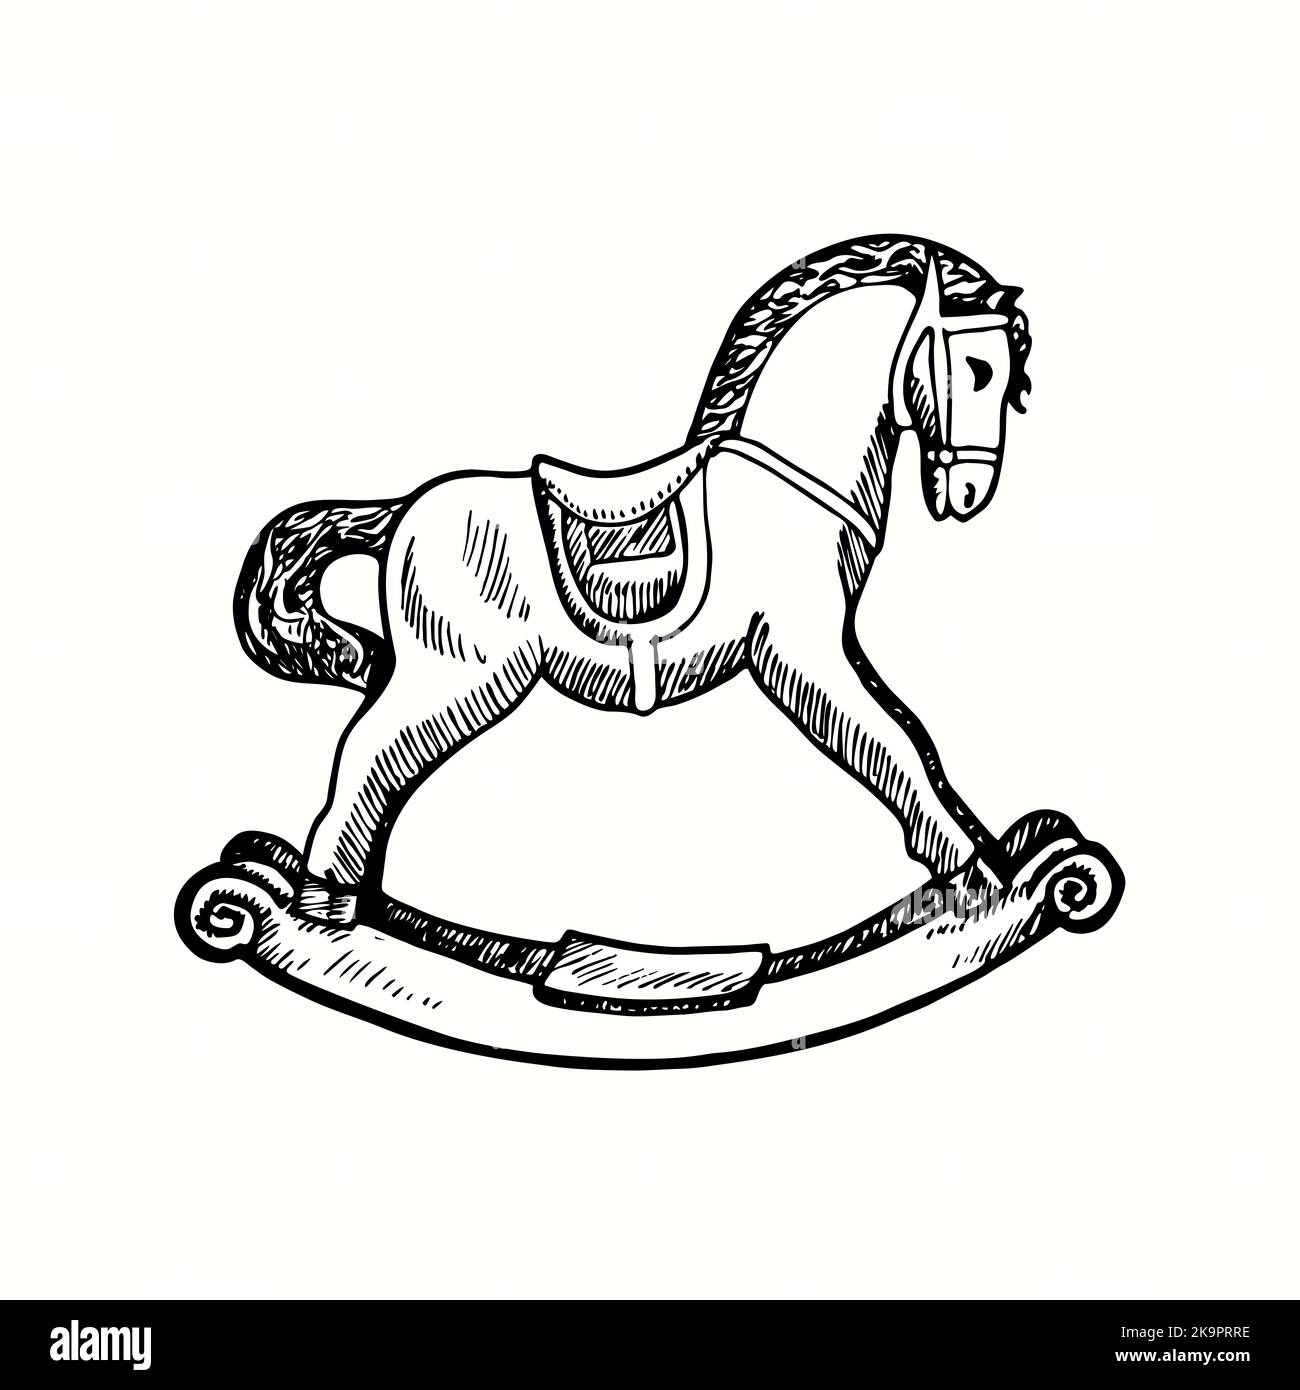 Rocking horse, side view. Ink black and white doodle drawing in woodcut style Stock Photo